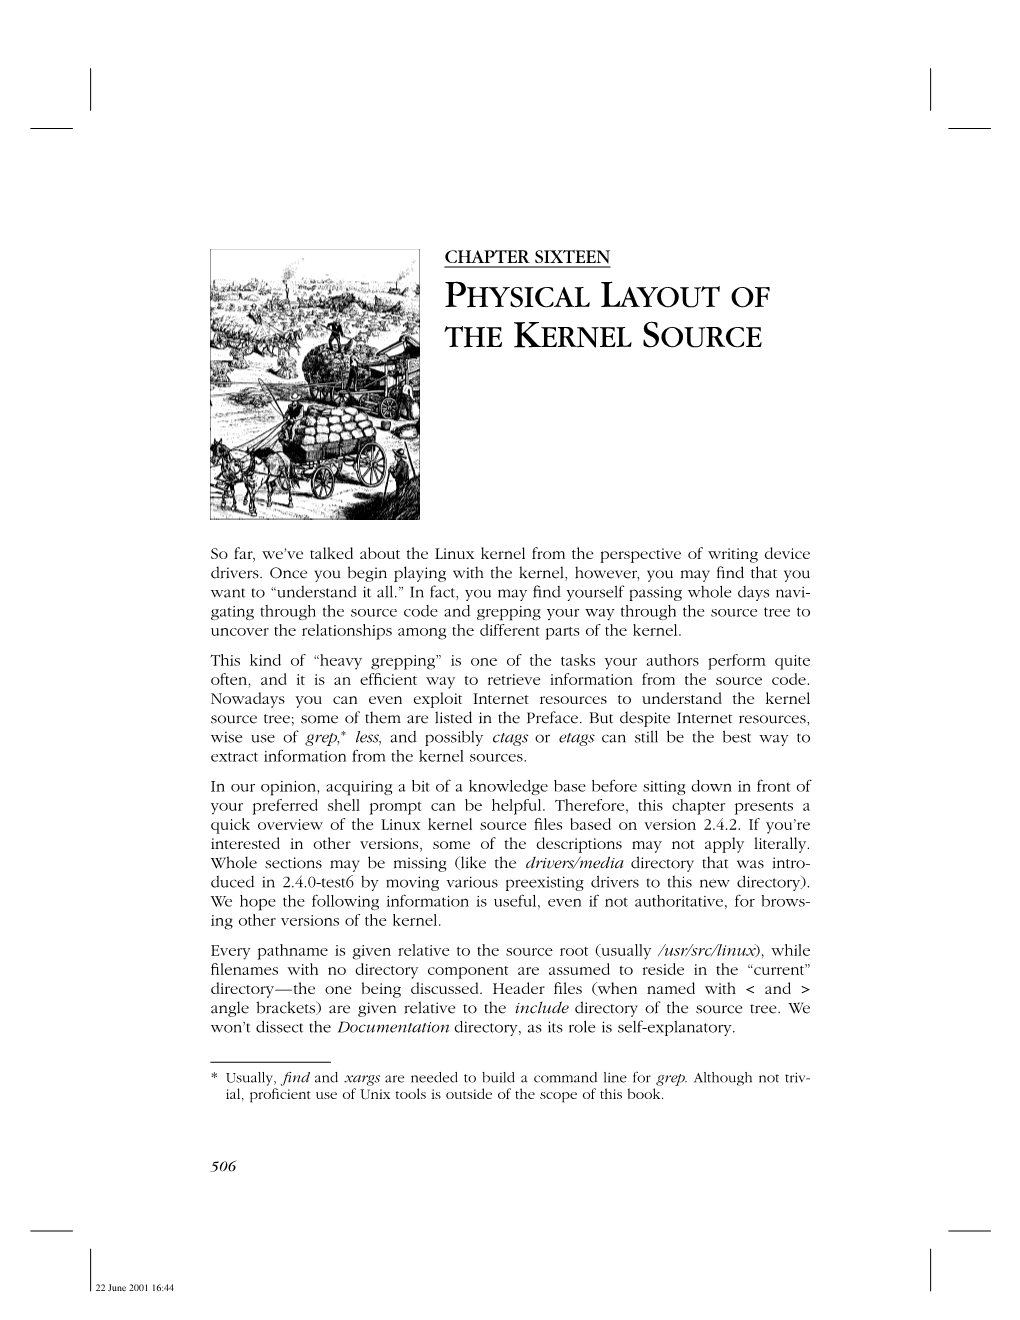 Physical Layout of the Kernel Source